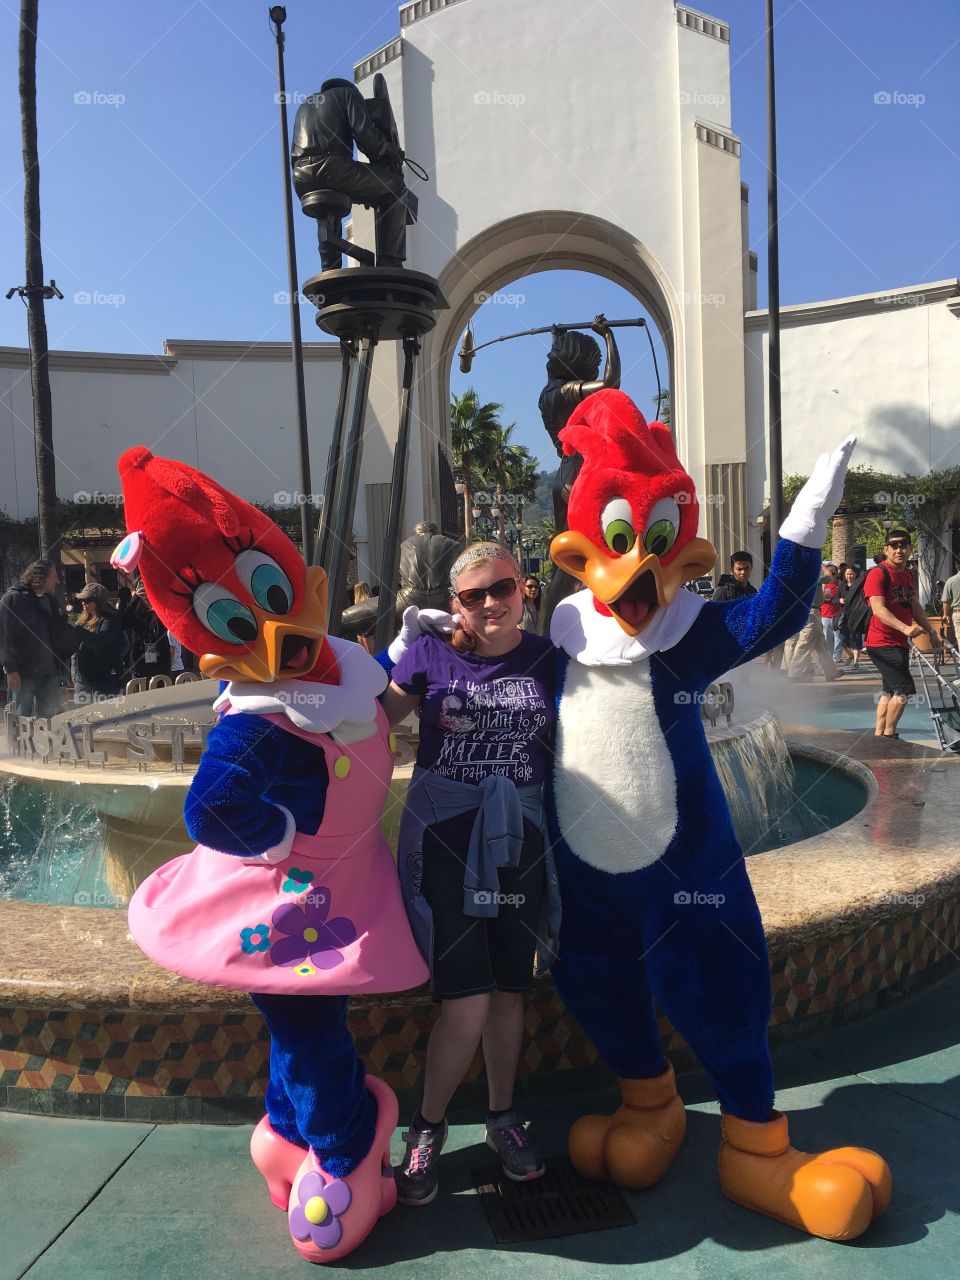 Posing with the woodpeckers at Universal Studios, CA.